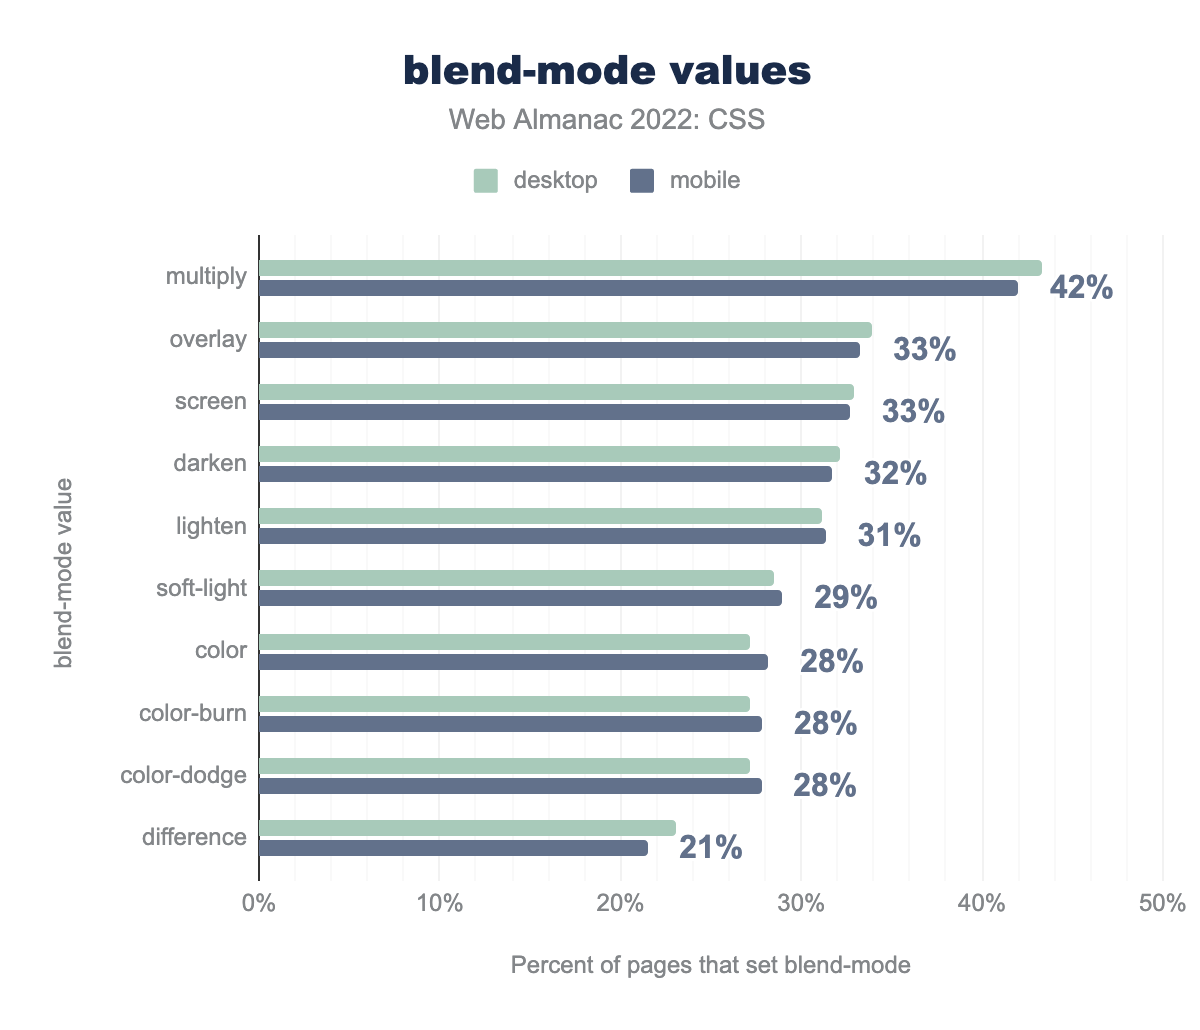 Most popular blend modes used on pages that set blend mode.